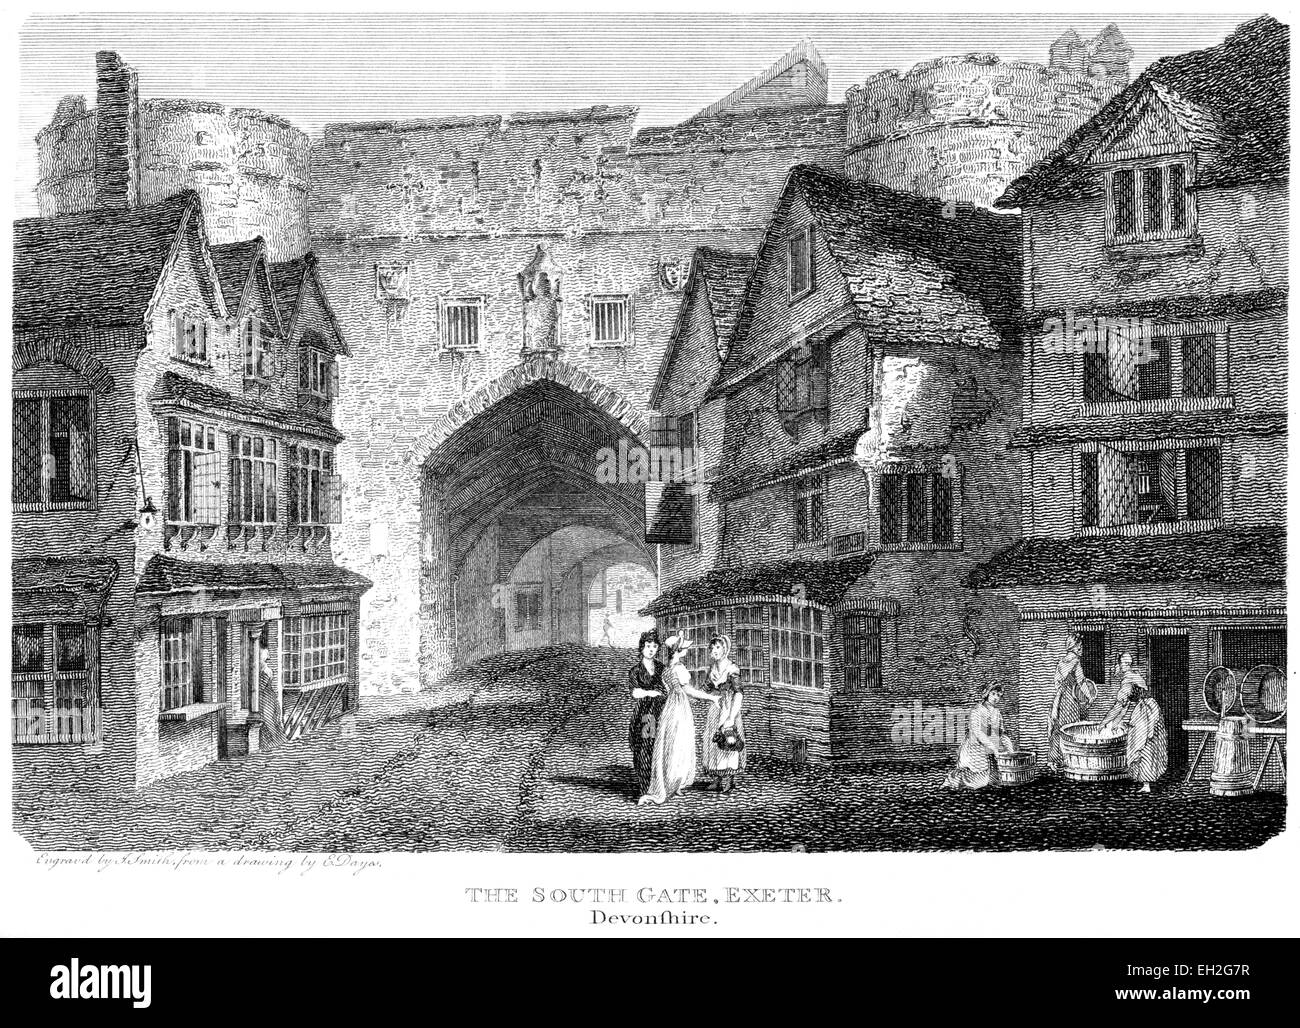 An engraving of The South Gate, Exeter, Devonshire scanned at high resolution from a book printed in 1803. Stock Photo